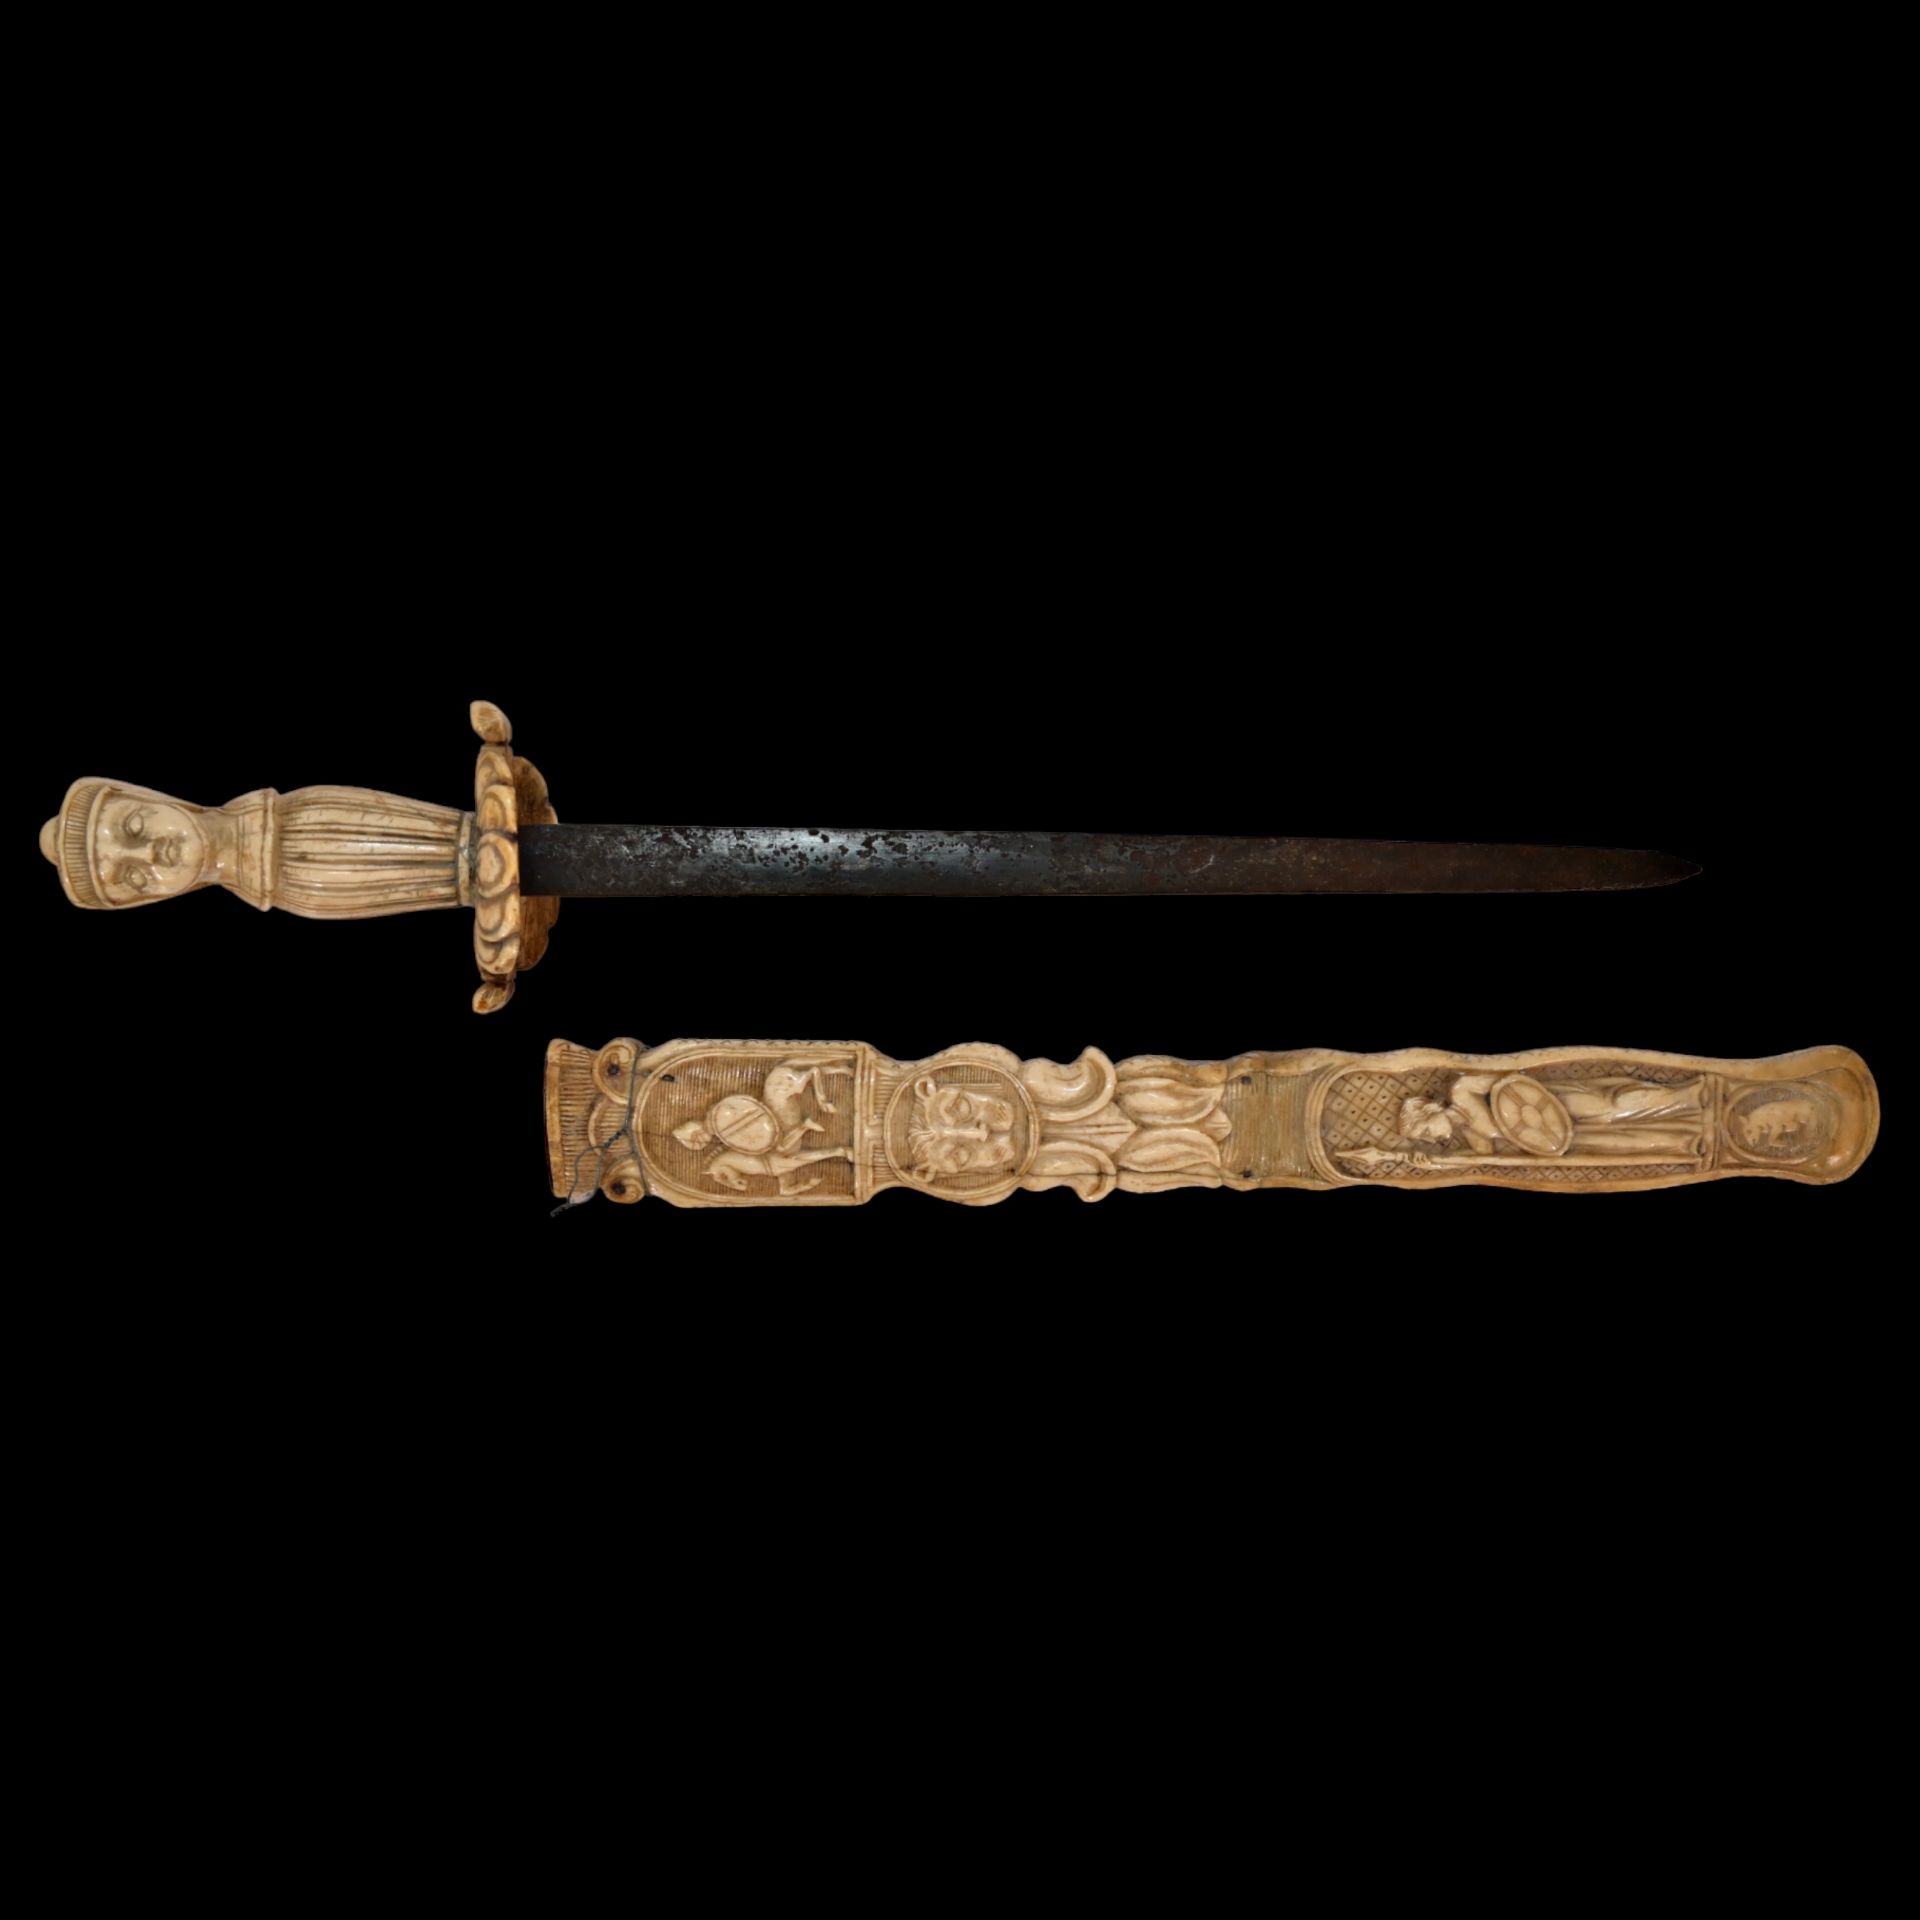 A Rare French nobleman's hunting dagger, hilt and scabbard carved from bone, 19th century. - Image 10 of 13